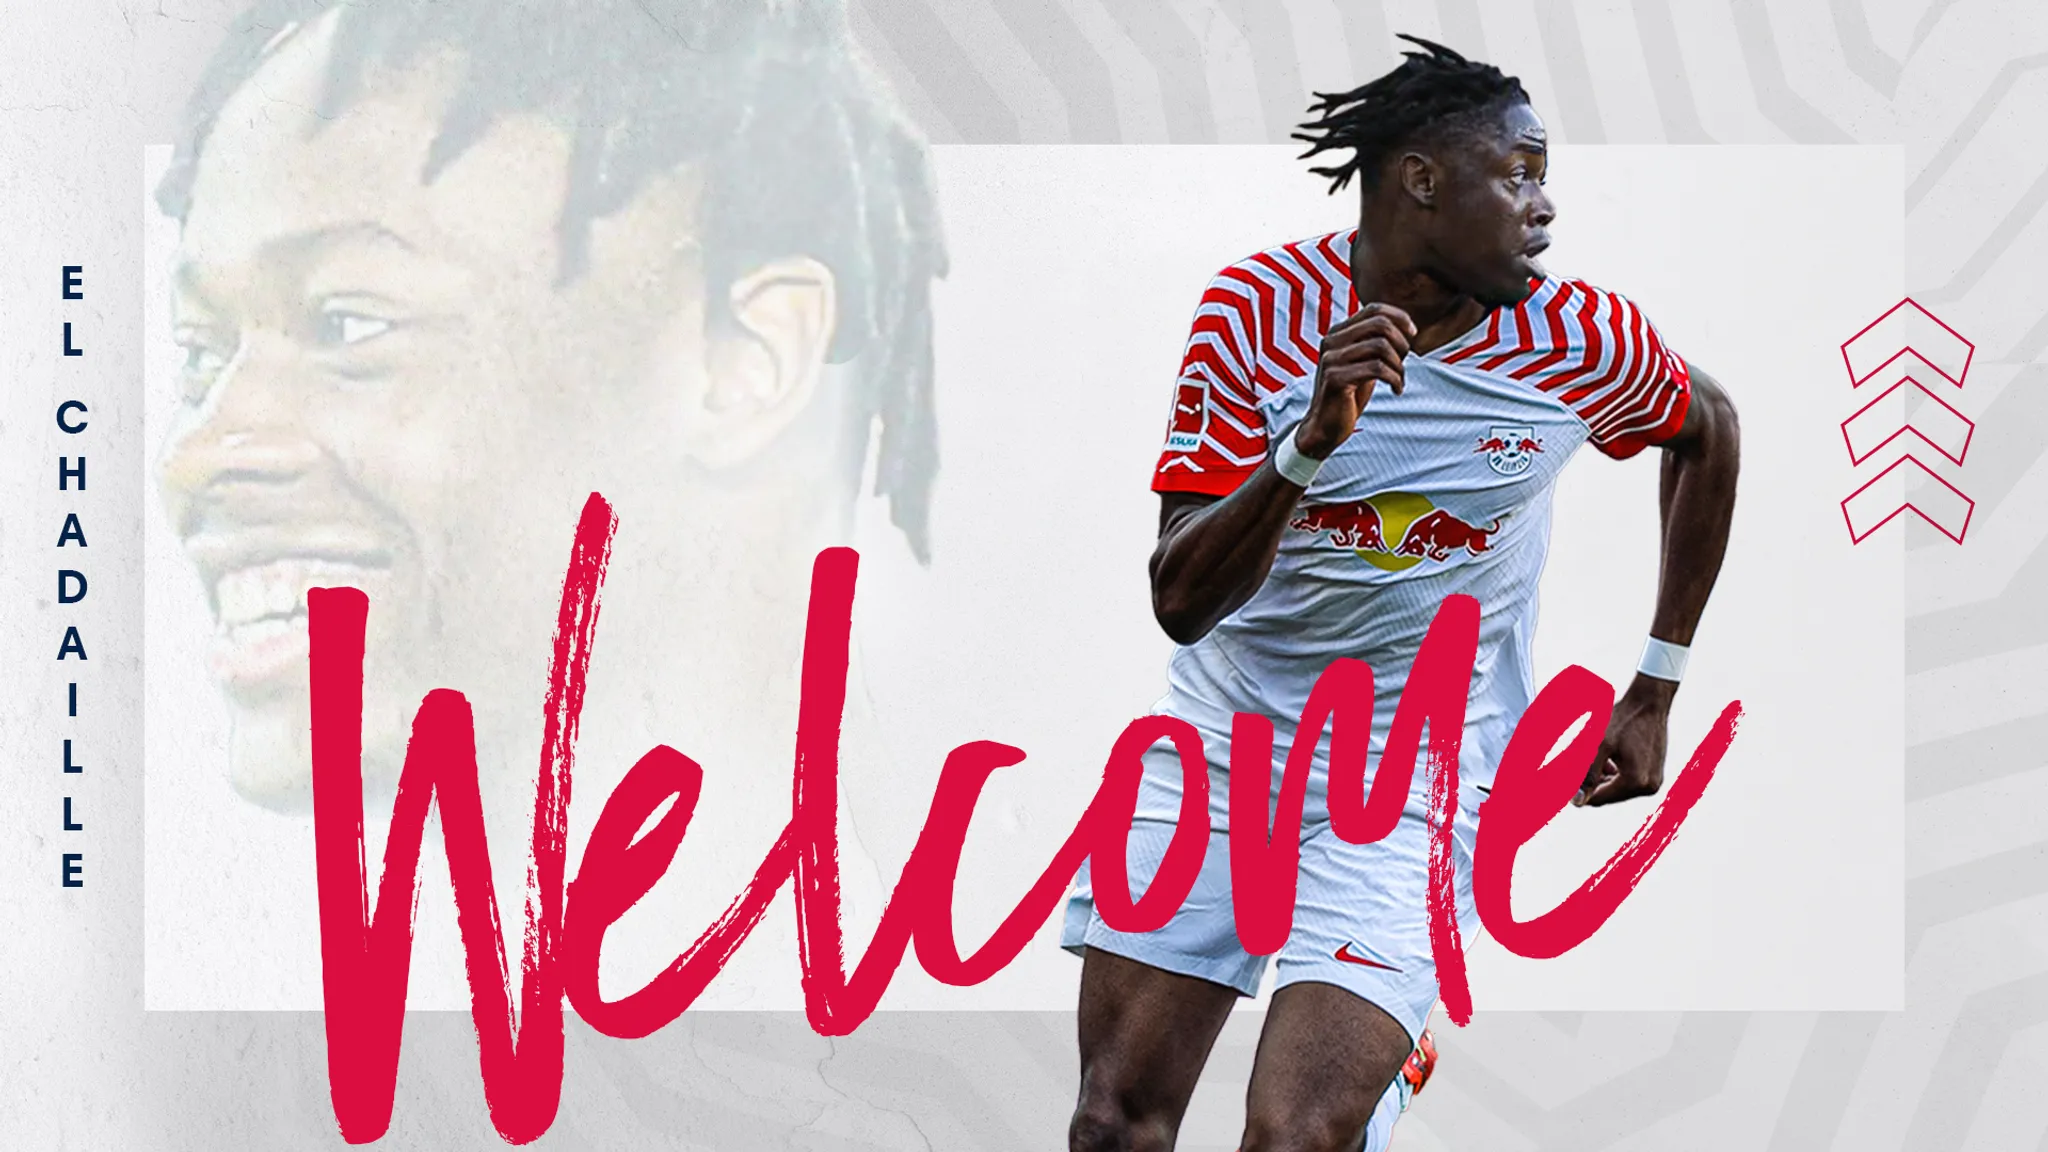 Welcome, Chad! El Chadaille Bitshiabu joins RB Leipzig from PSG.